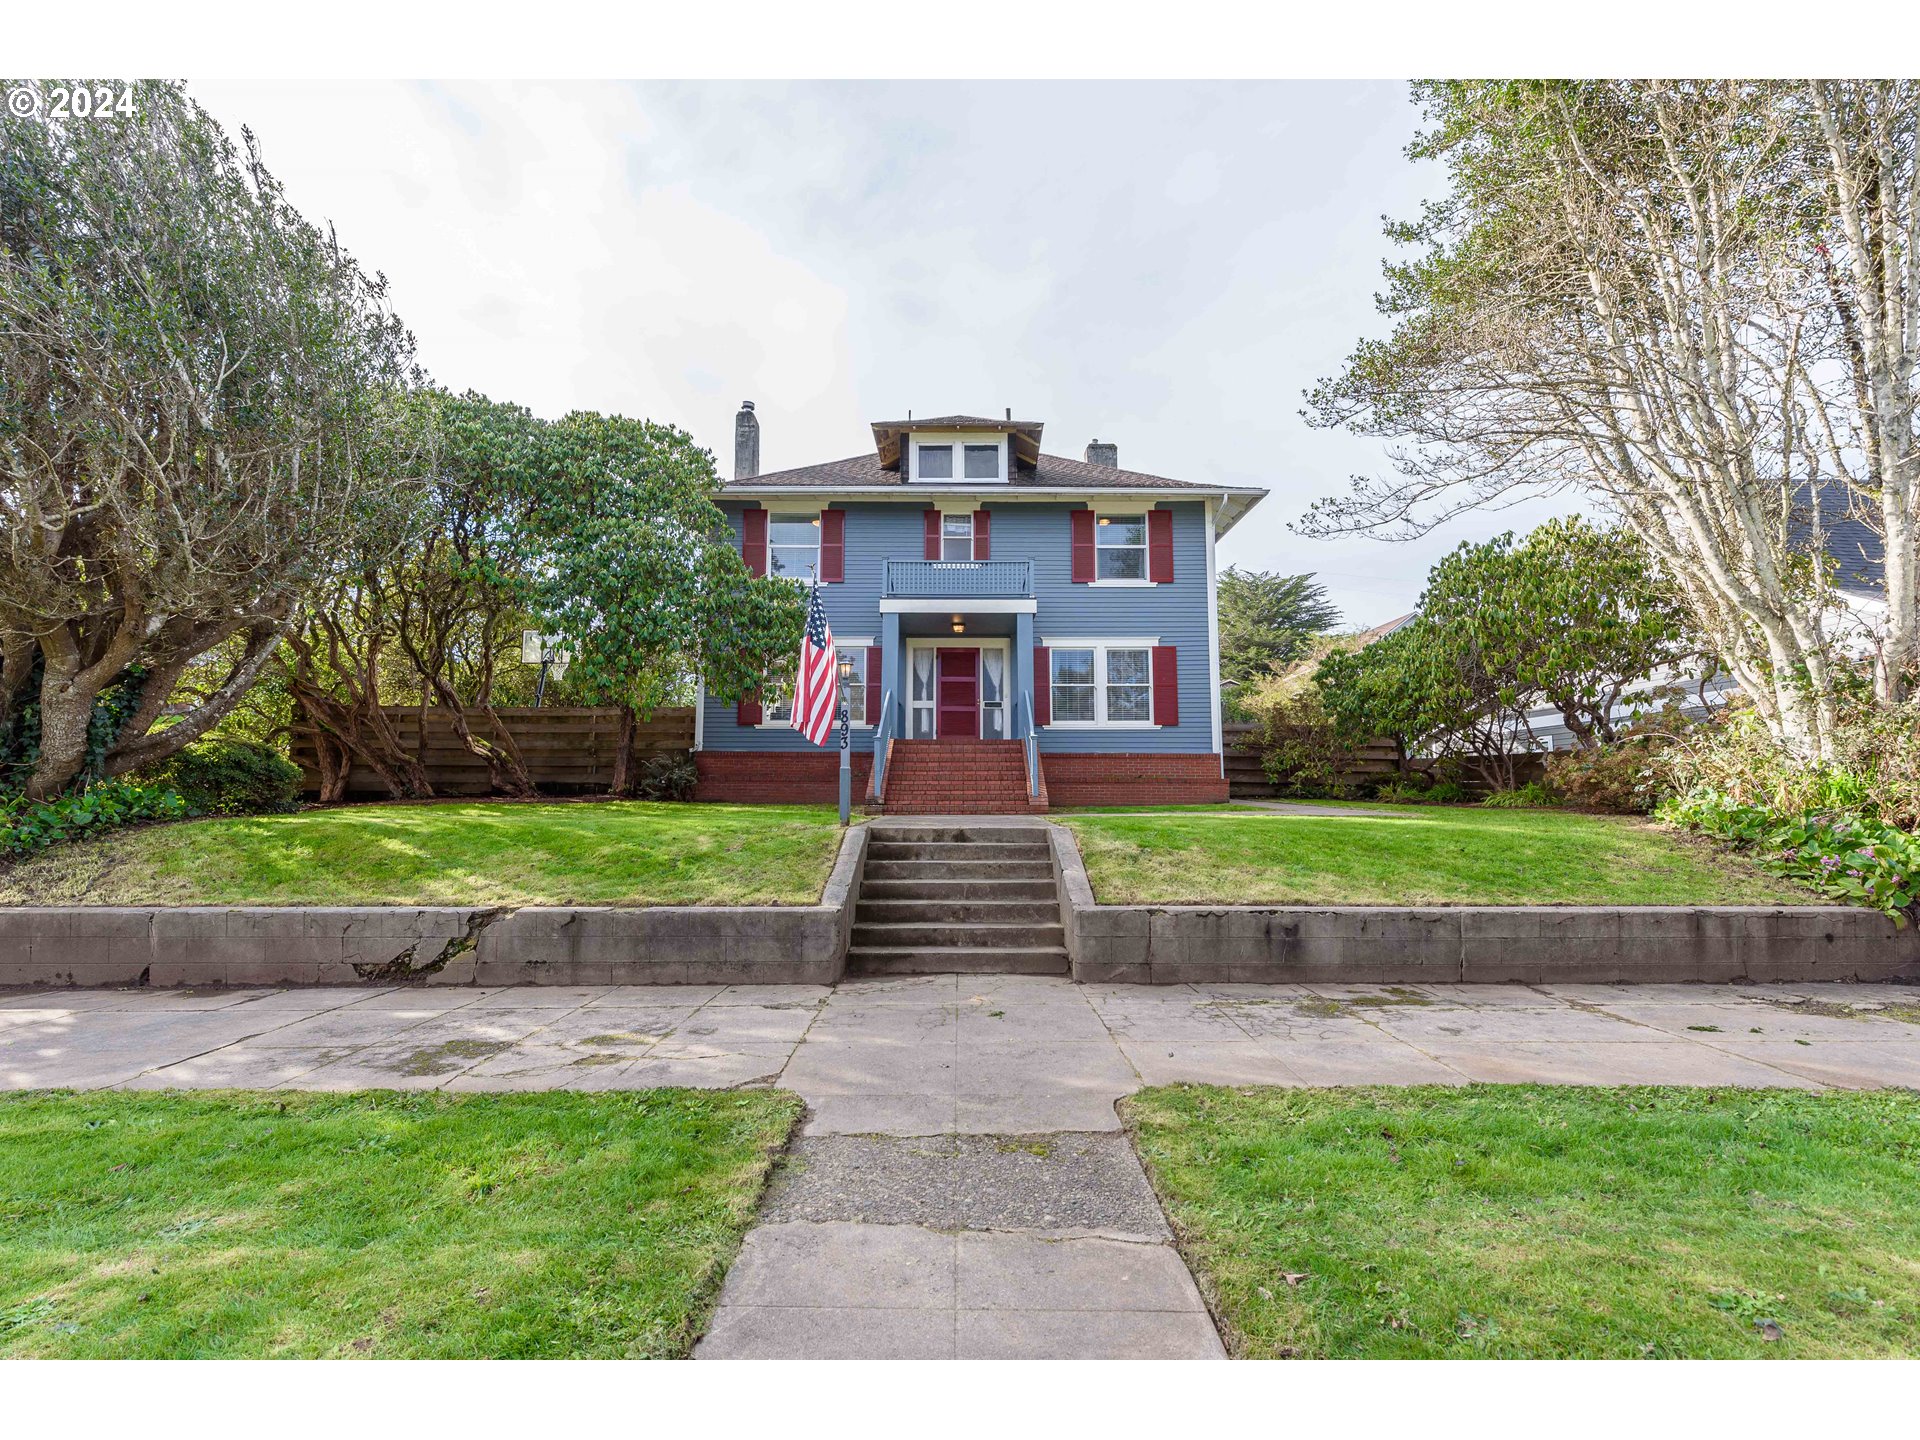 893 S 5TH ST, Coos Bay, OR 